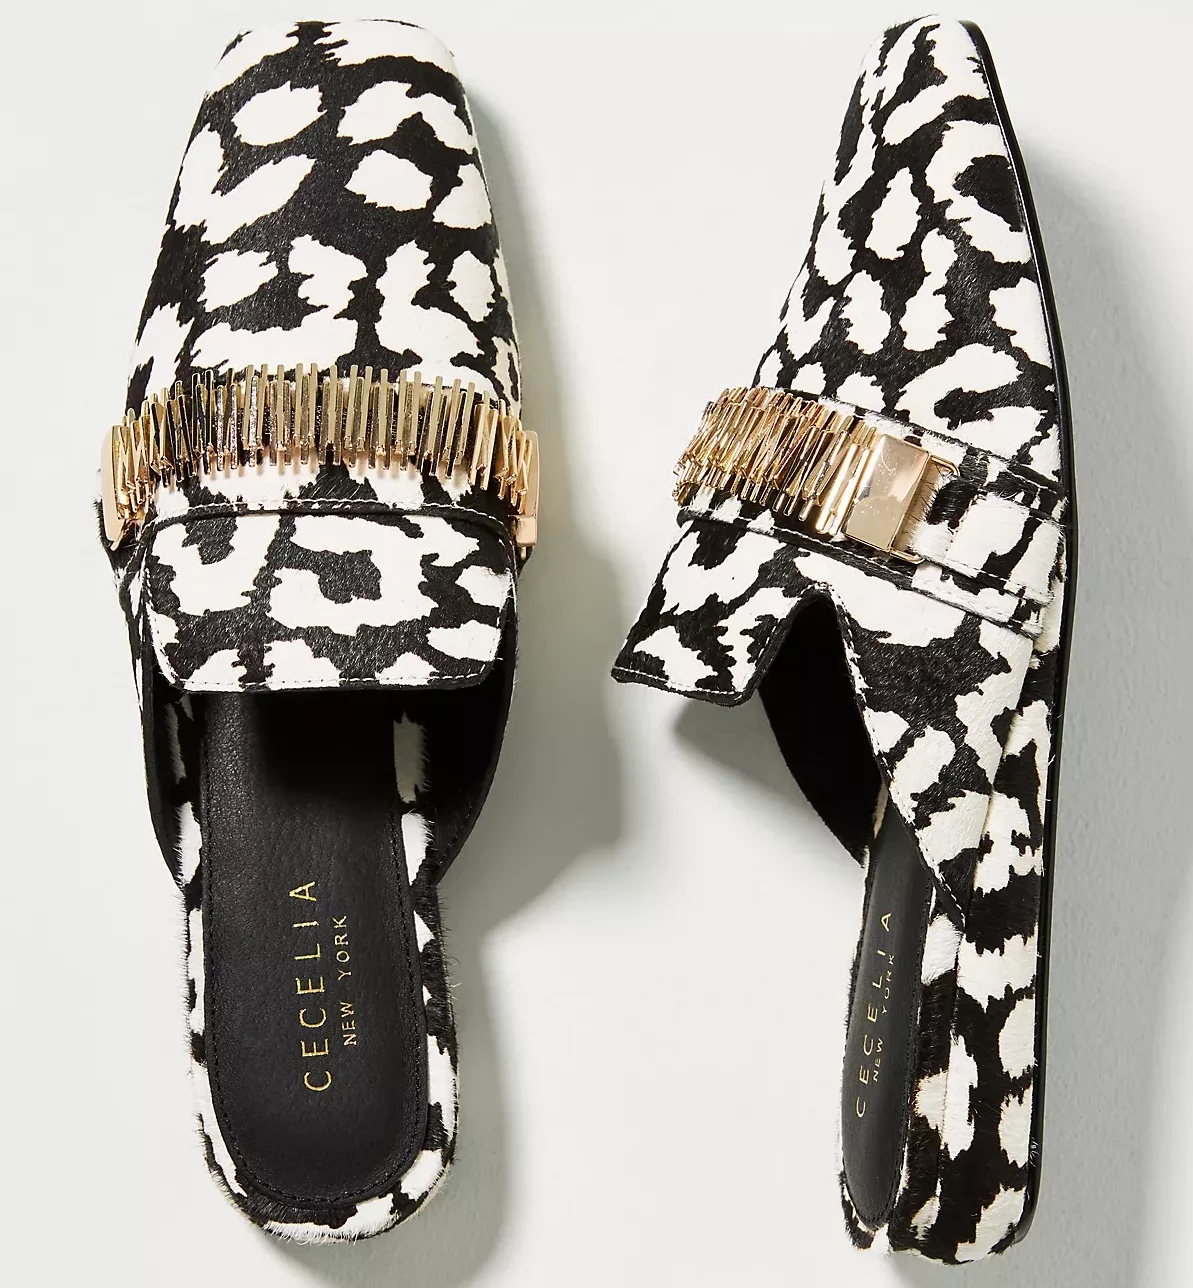 Stylist Pick Of The Week Round Up black & white statement mules how to wear black and white this winter nashville stylists share statement shoes for winter personal stylists share fun winter shoes must have winter shoes